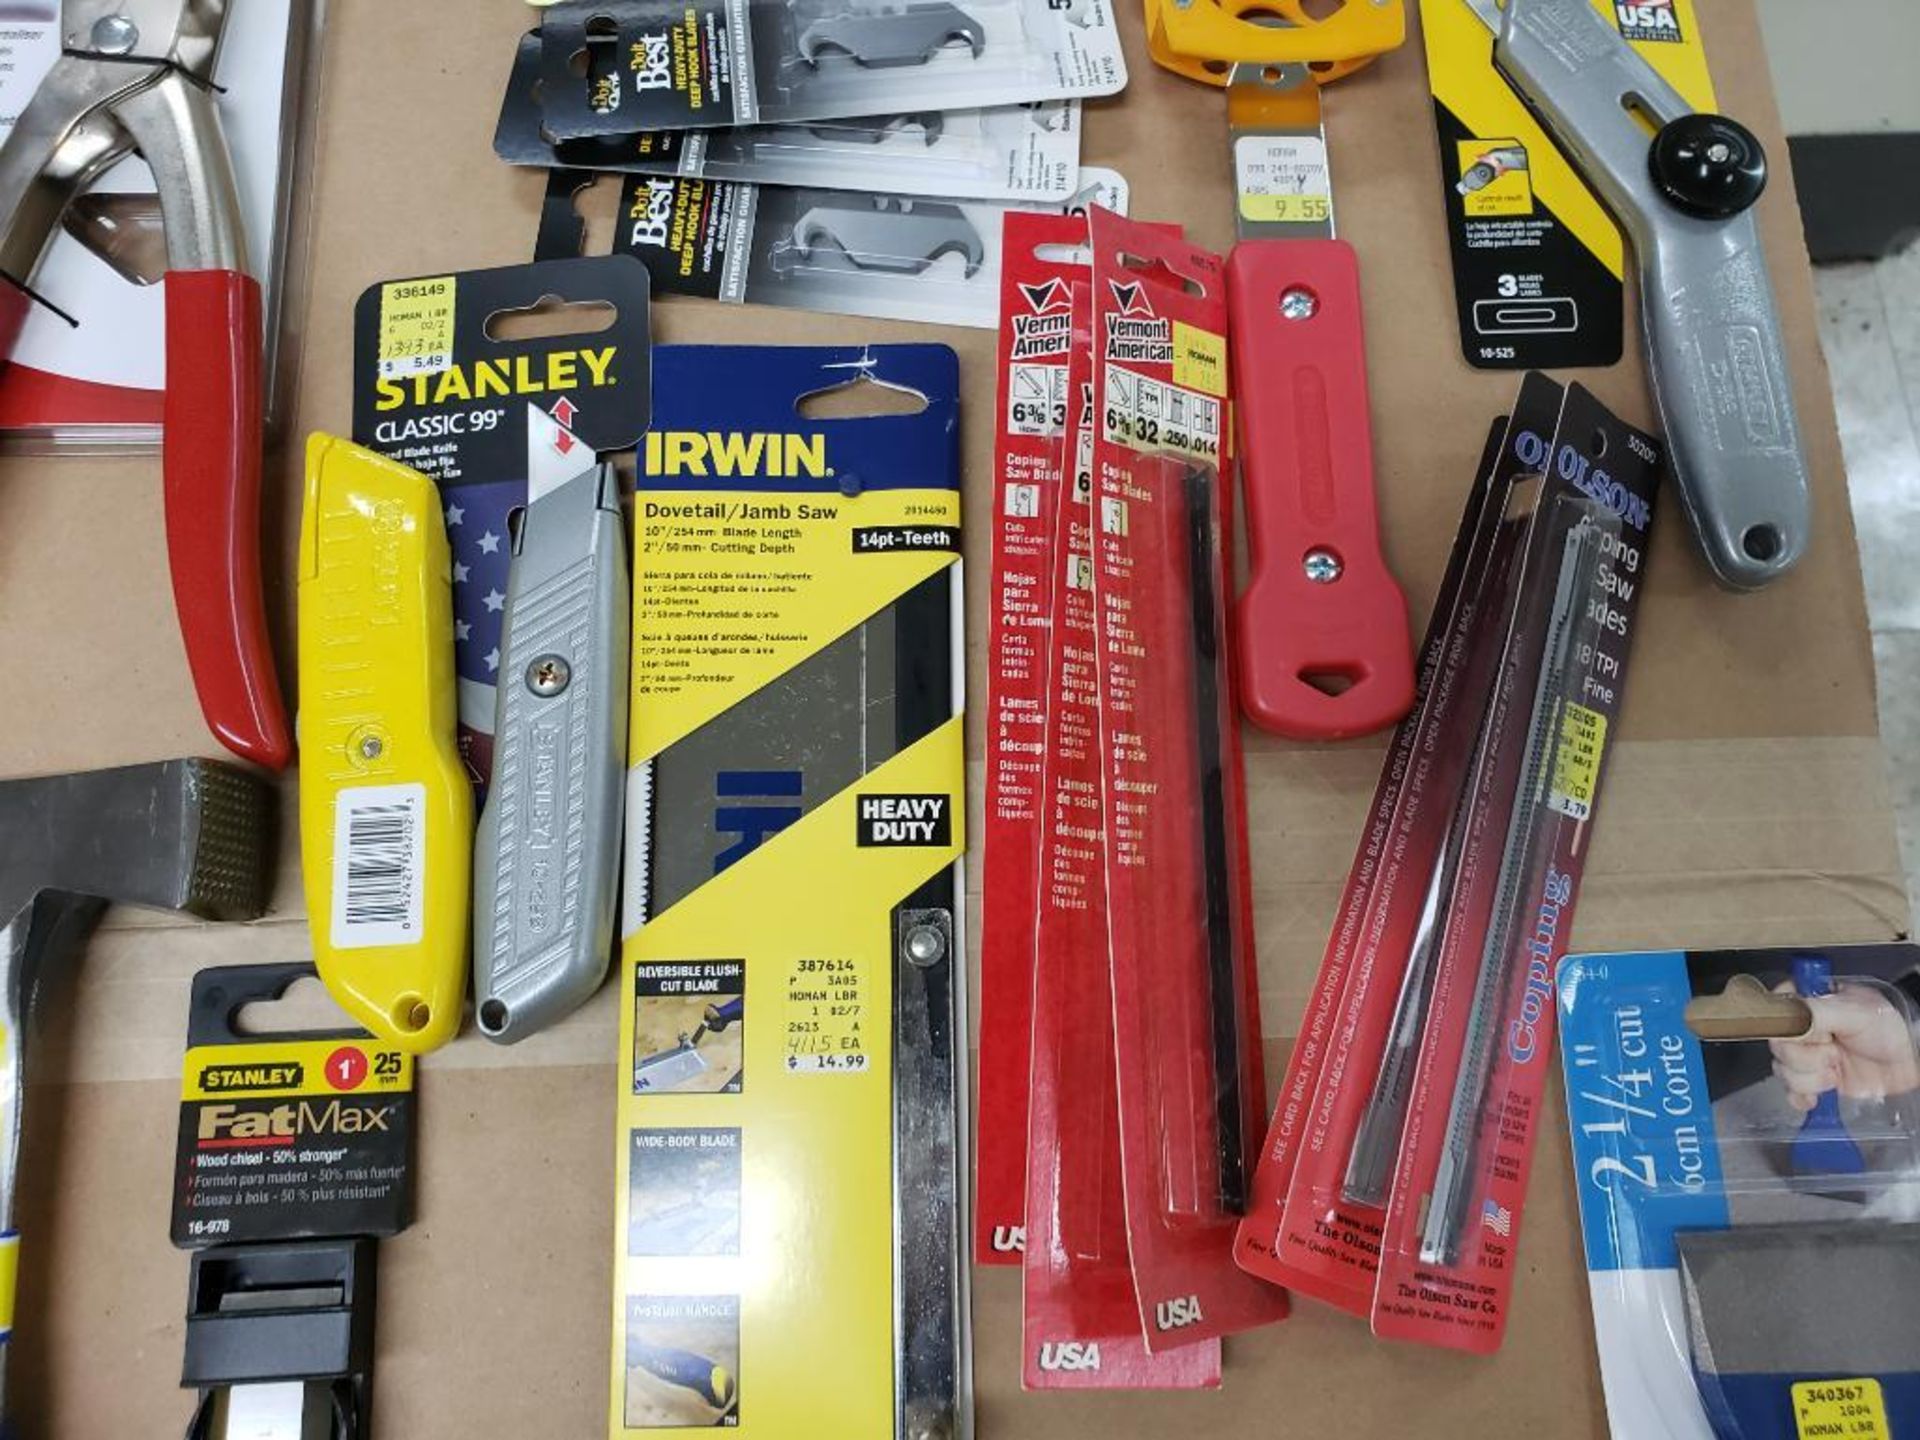 Large assortment of tools. New as pictured. - Image 7 of 12